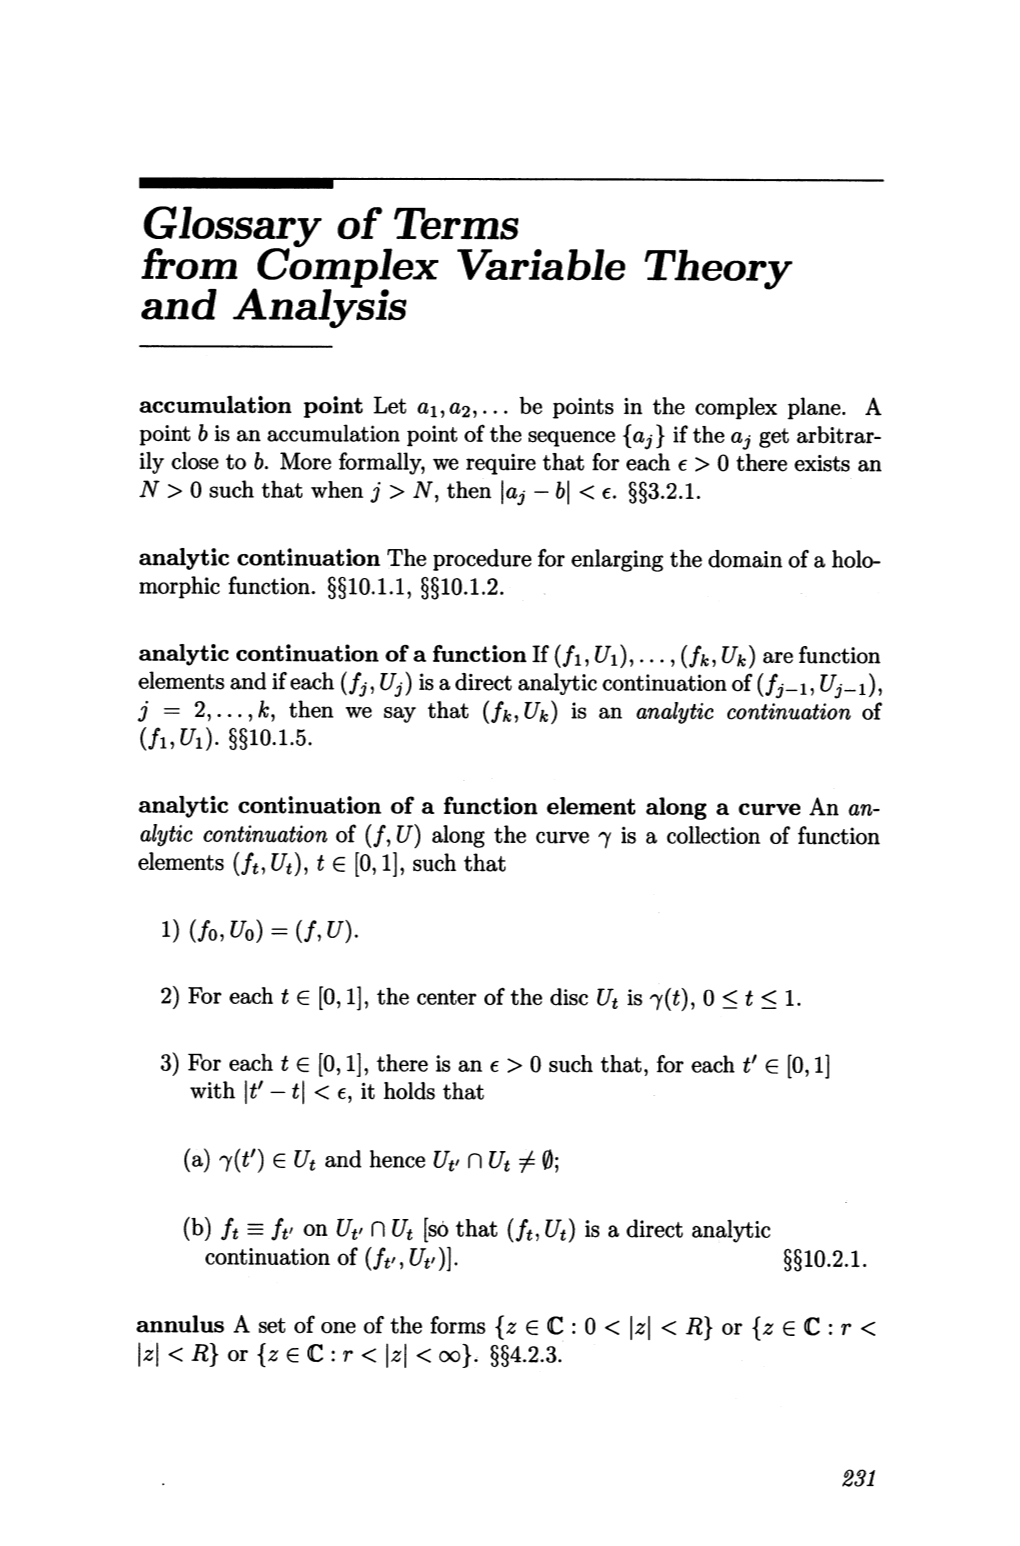 Glossary of Terms from Complex Variable Theory and Analysis Accumulation Point Let At, A2,